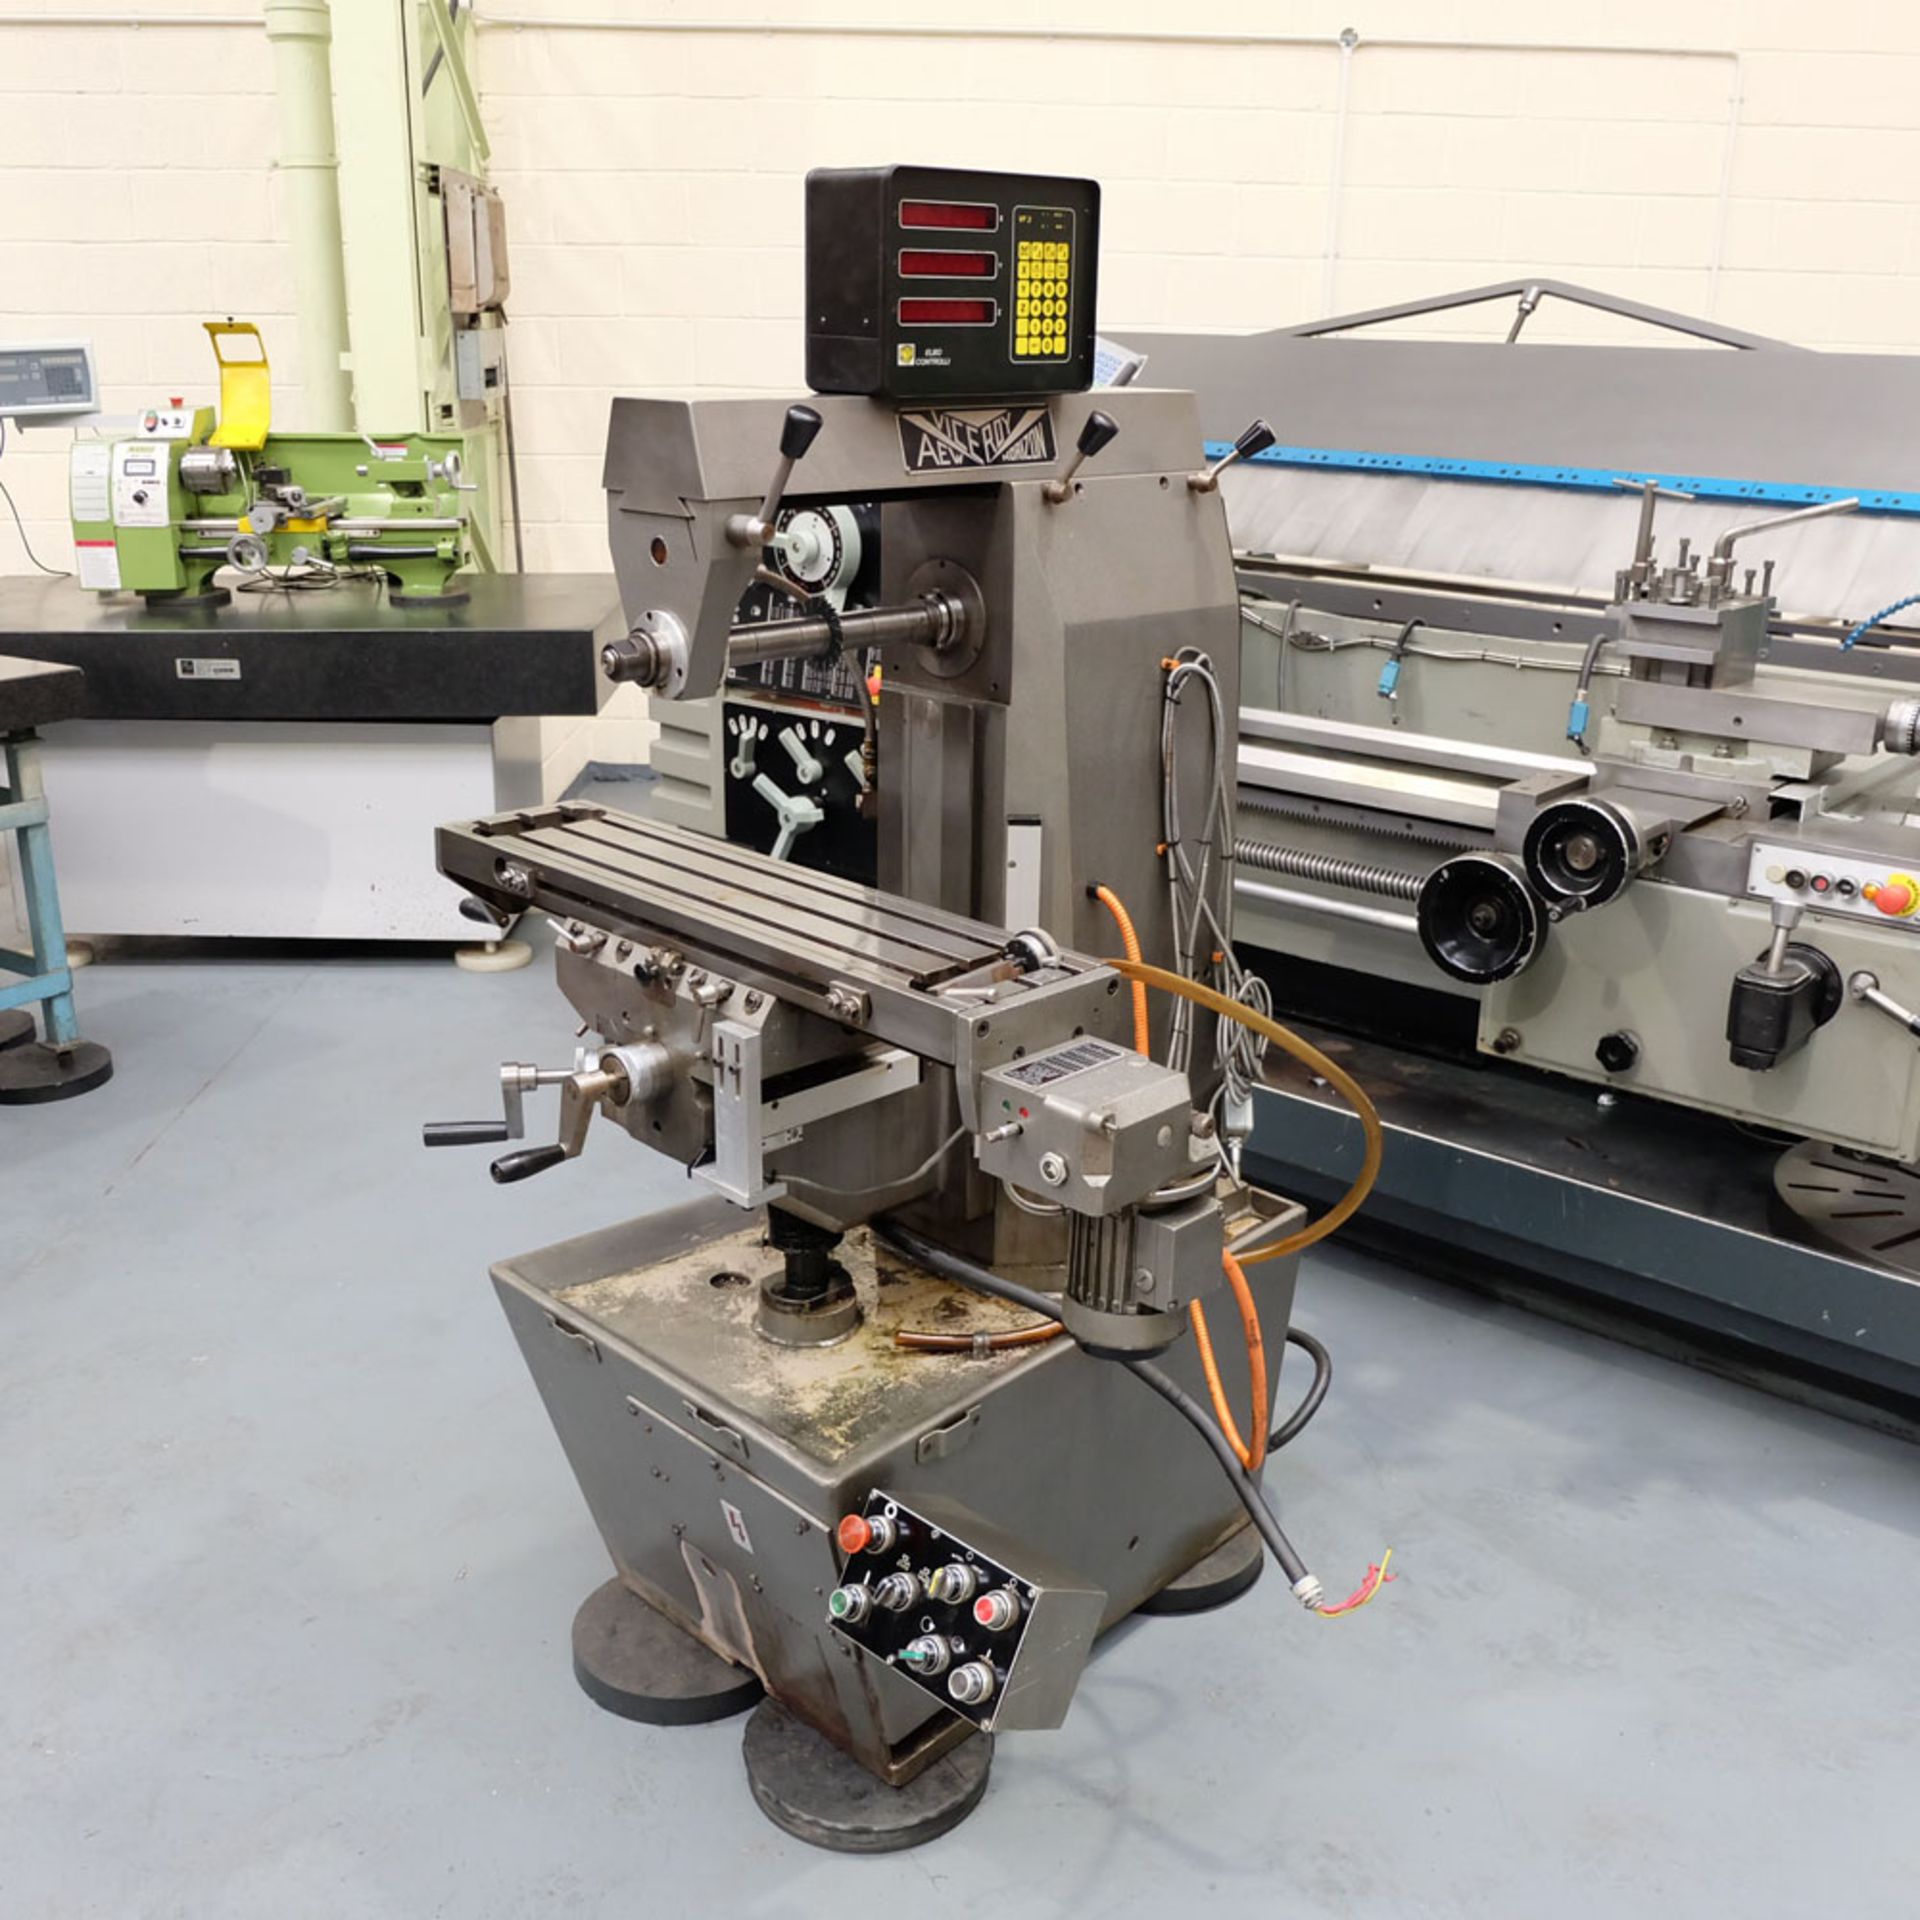 Viceroy Type AEW Horizontal Milling Machine. Table Size 35" x 8". Power Feed in X Axis. - Image 2 of 10